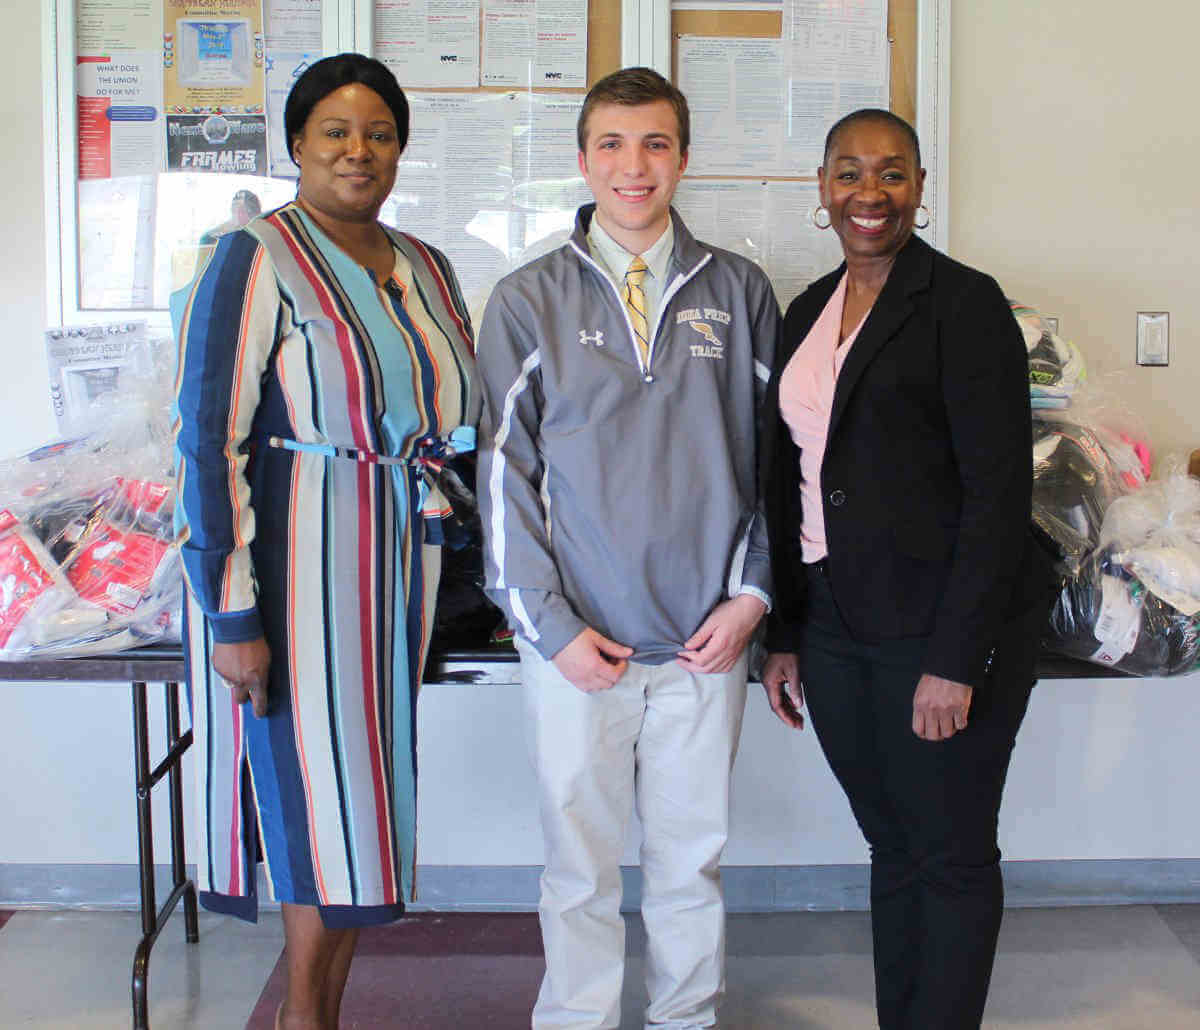 Pelham Bay youth helps Bronx homeless with sock drive|Pelham Bay youth helps Bronx homeless with sock drive